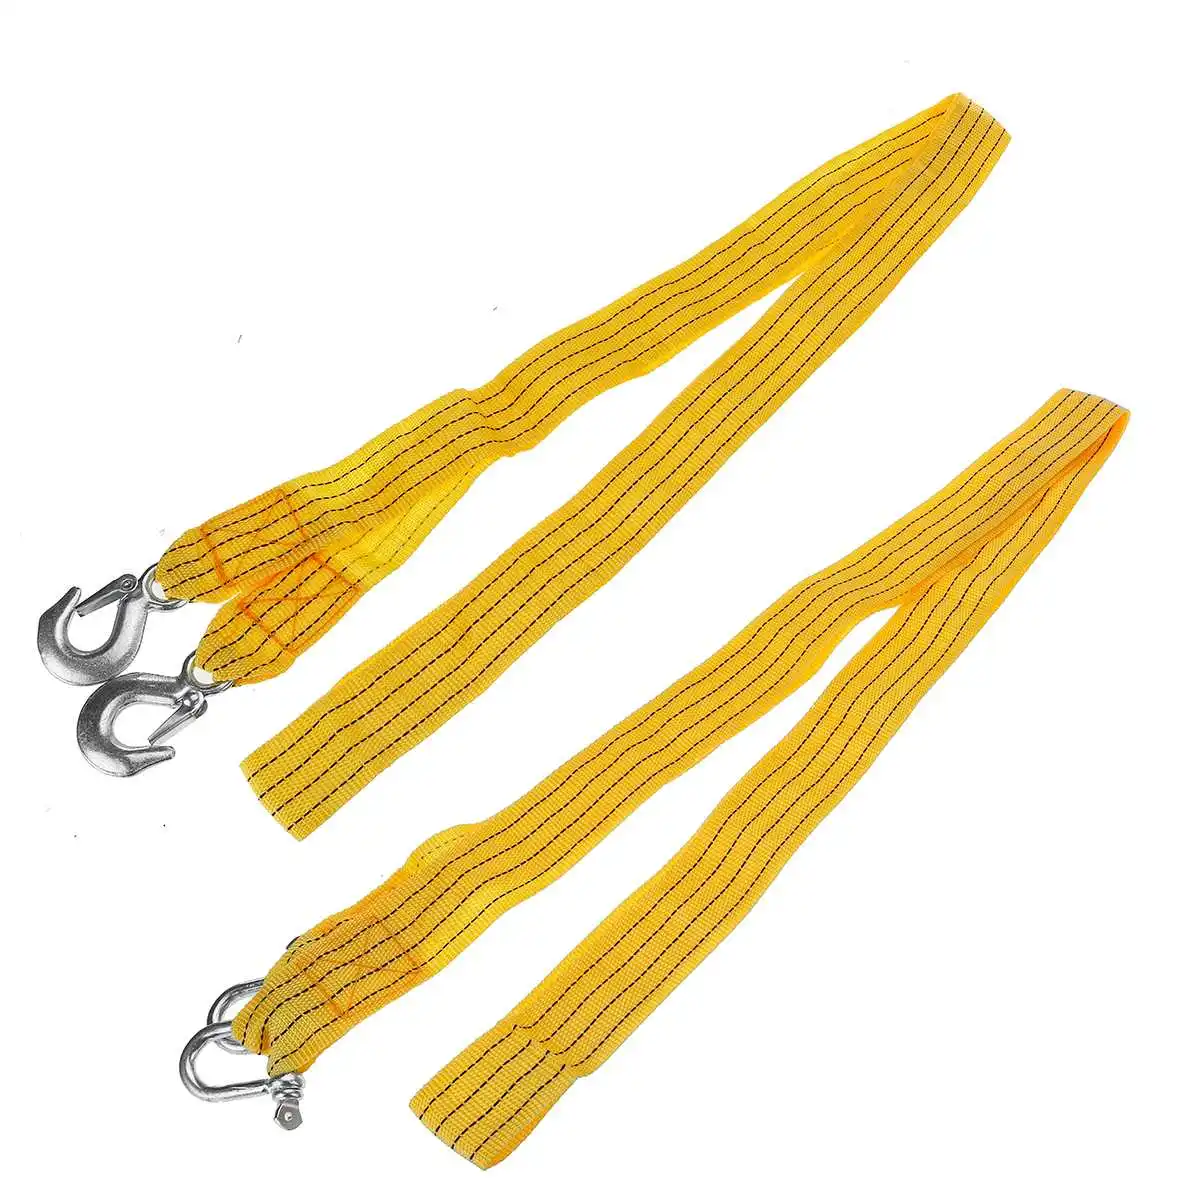 3 Meters Heavy Duty 3Tons Car Tow Cable Towing Pull Rope Strap Hooks Van Road Recovery Eagle hook / U-hook Towing Ropes